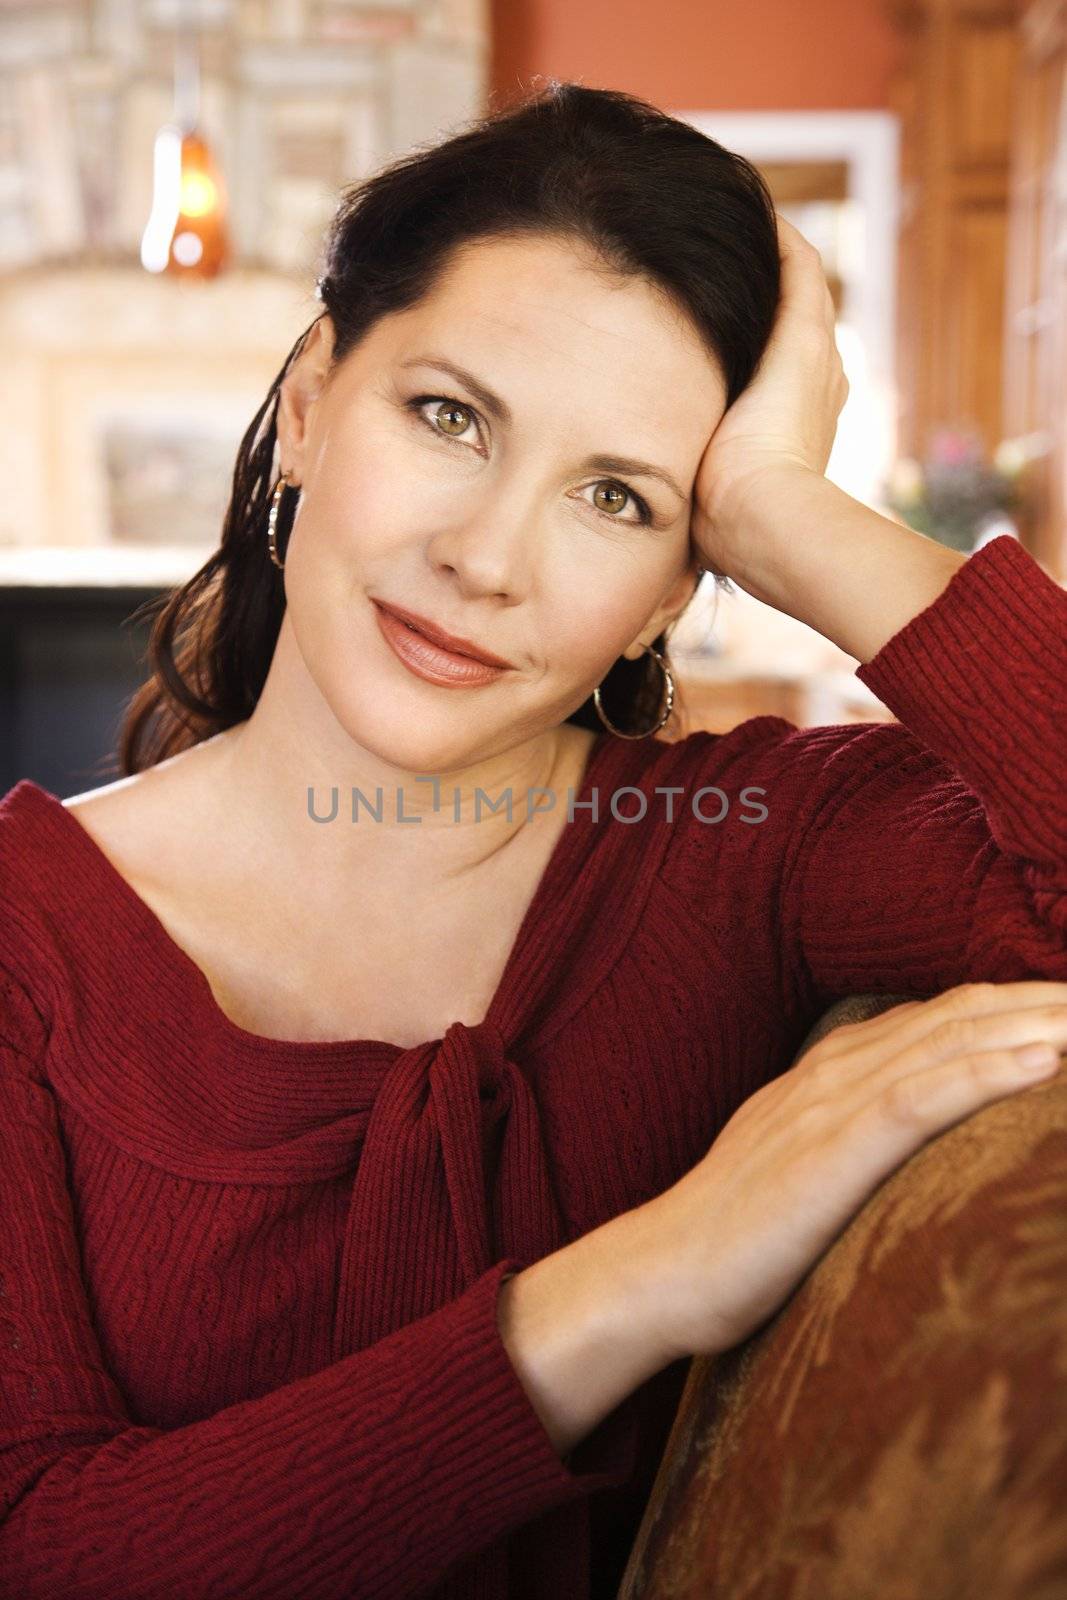 Brunette Caucasian woman with head resting on hand looking at viewer.